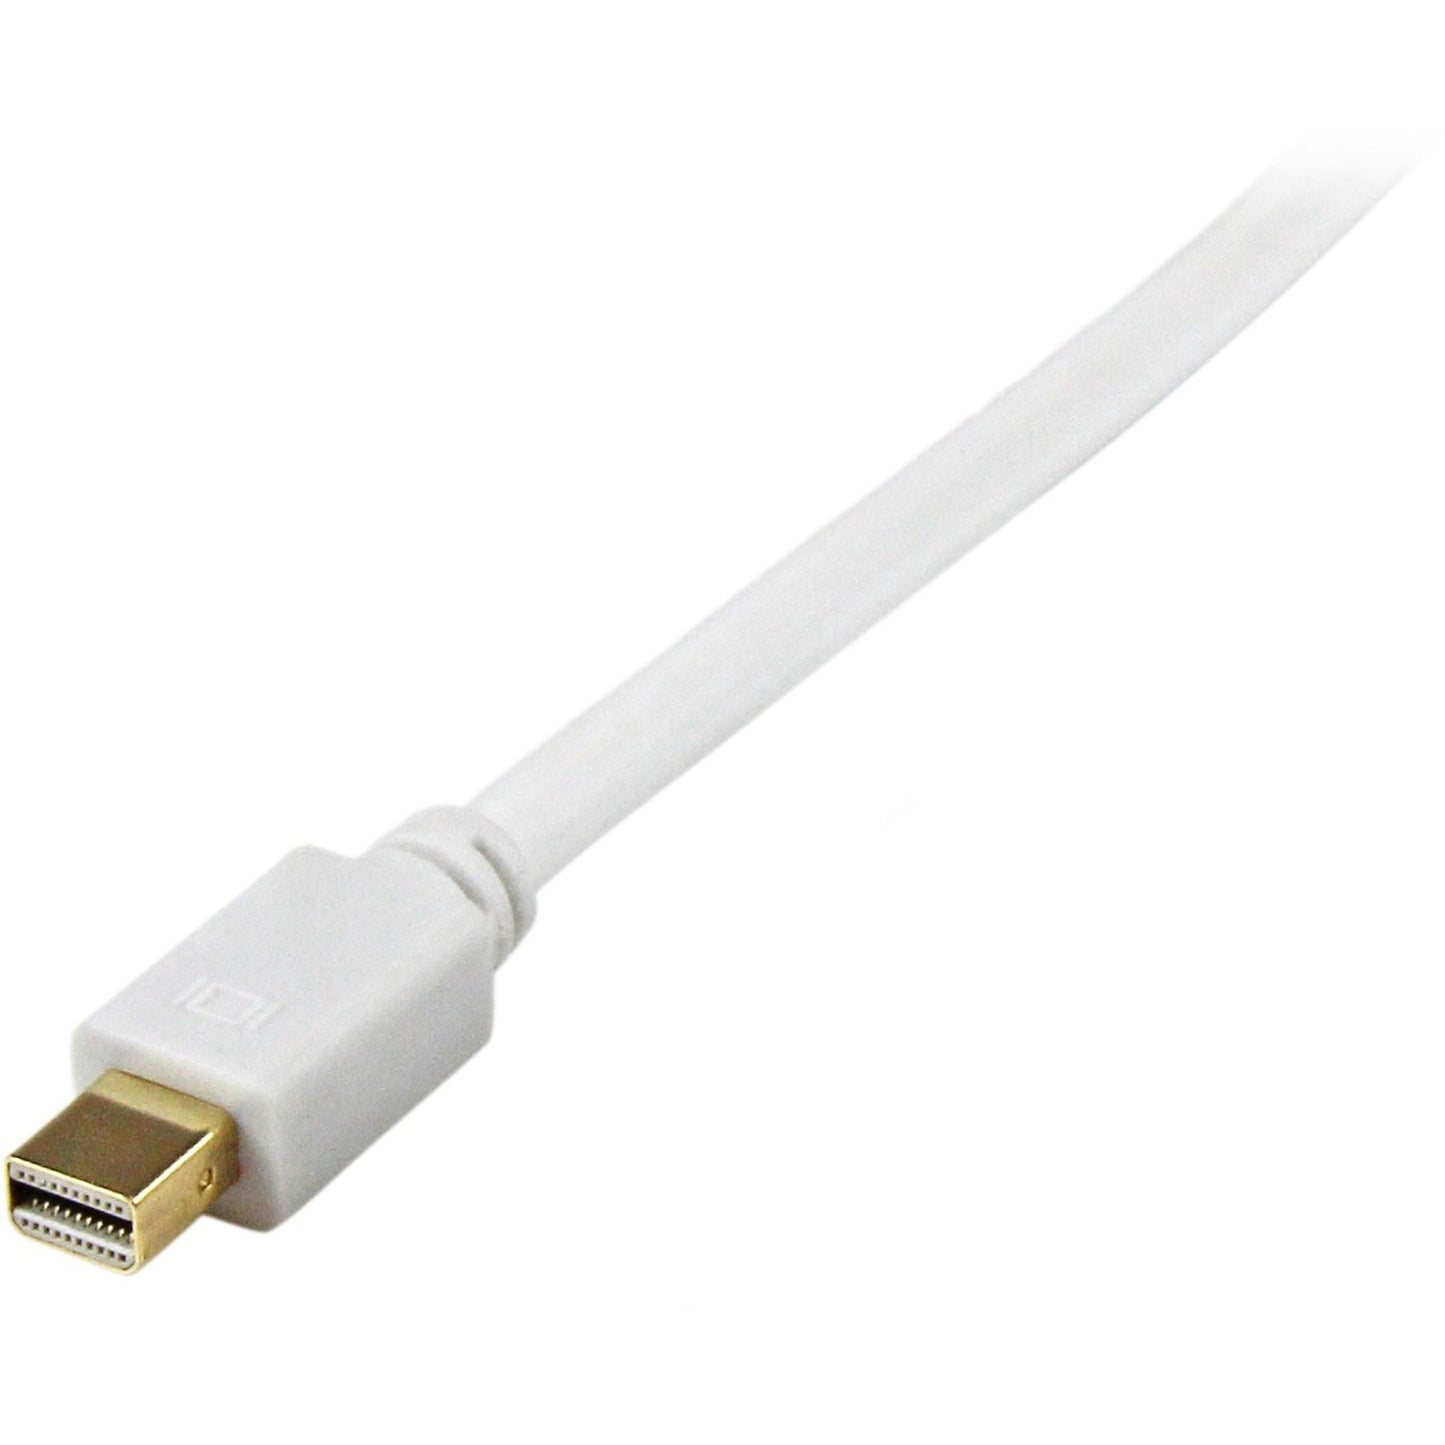 StarTech.com 3 ft Mini DisplayPort to DVI Active Adapter Converter Cable - mDP to DVI 1920x1200 - White